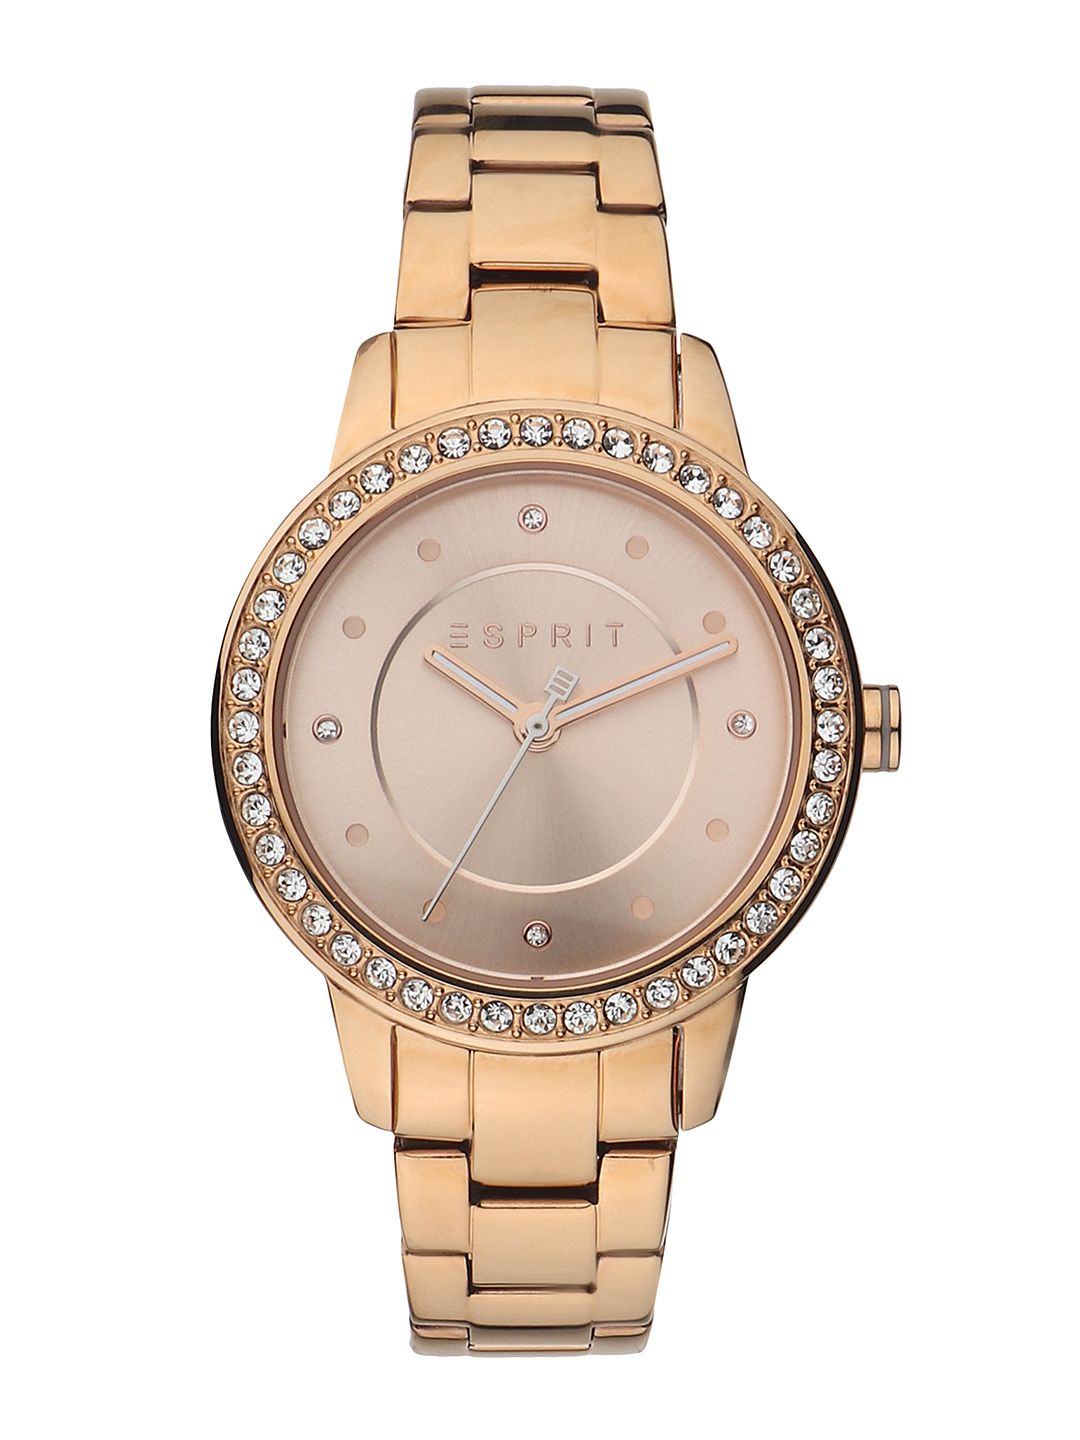 ESPRIT Women Rose Gold- Toned Analogue Watch ES1L163M0125 Price in India